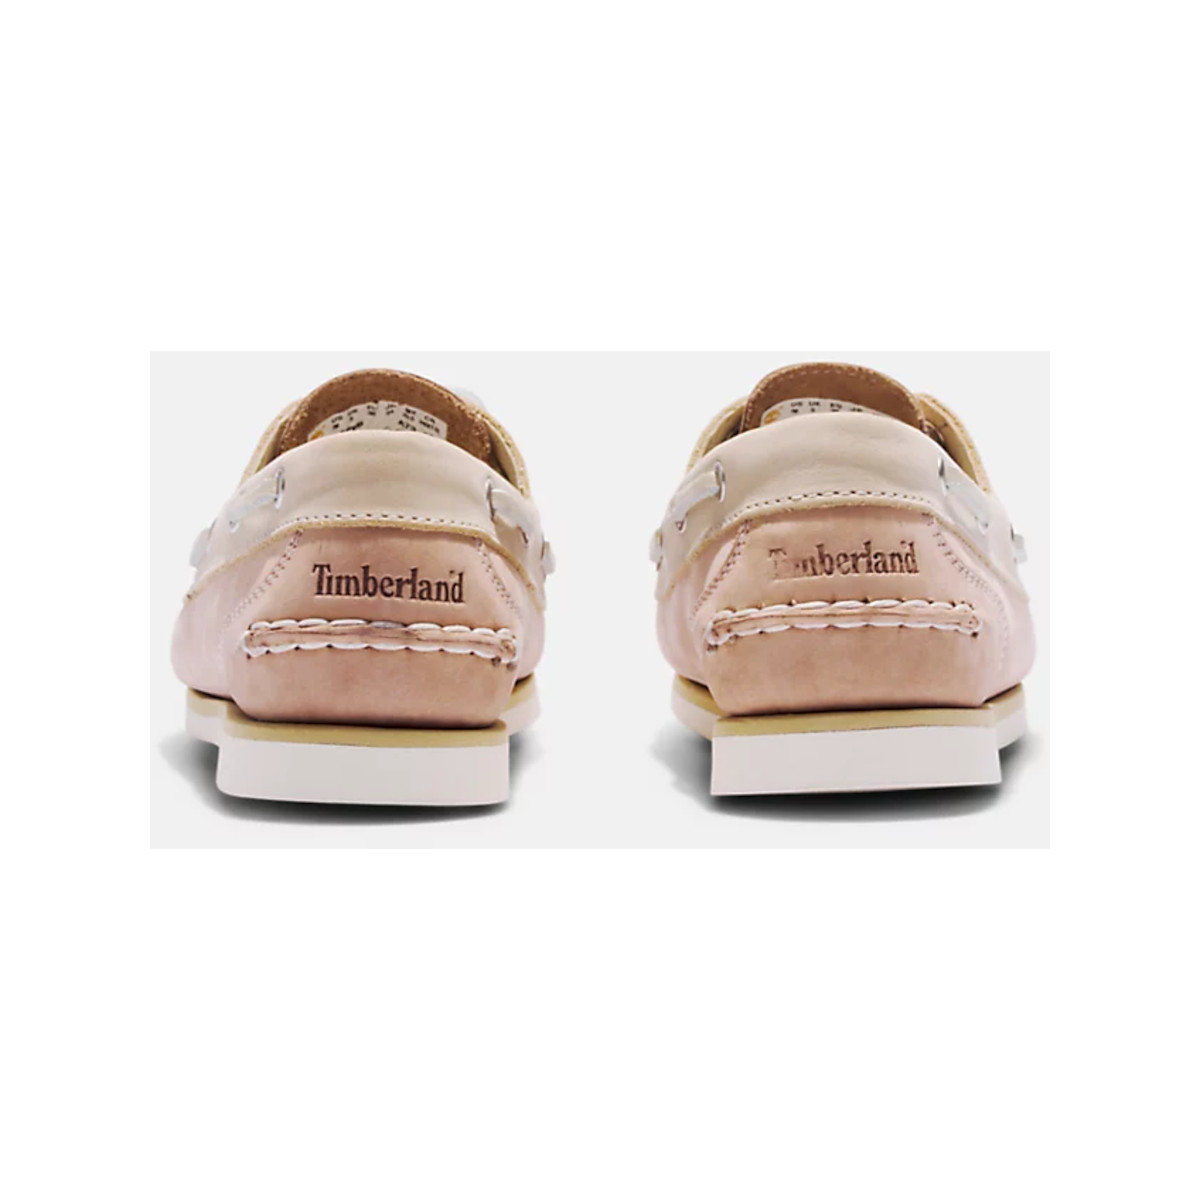 Timberland Classic Boat chaussure bateau femme - beige clair, pointure 38